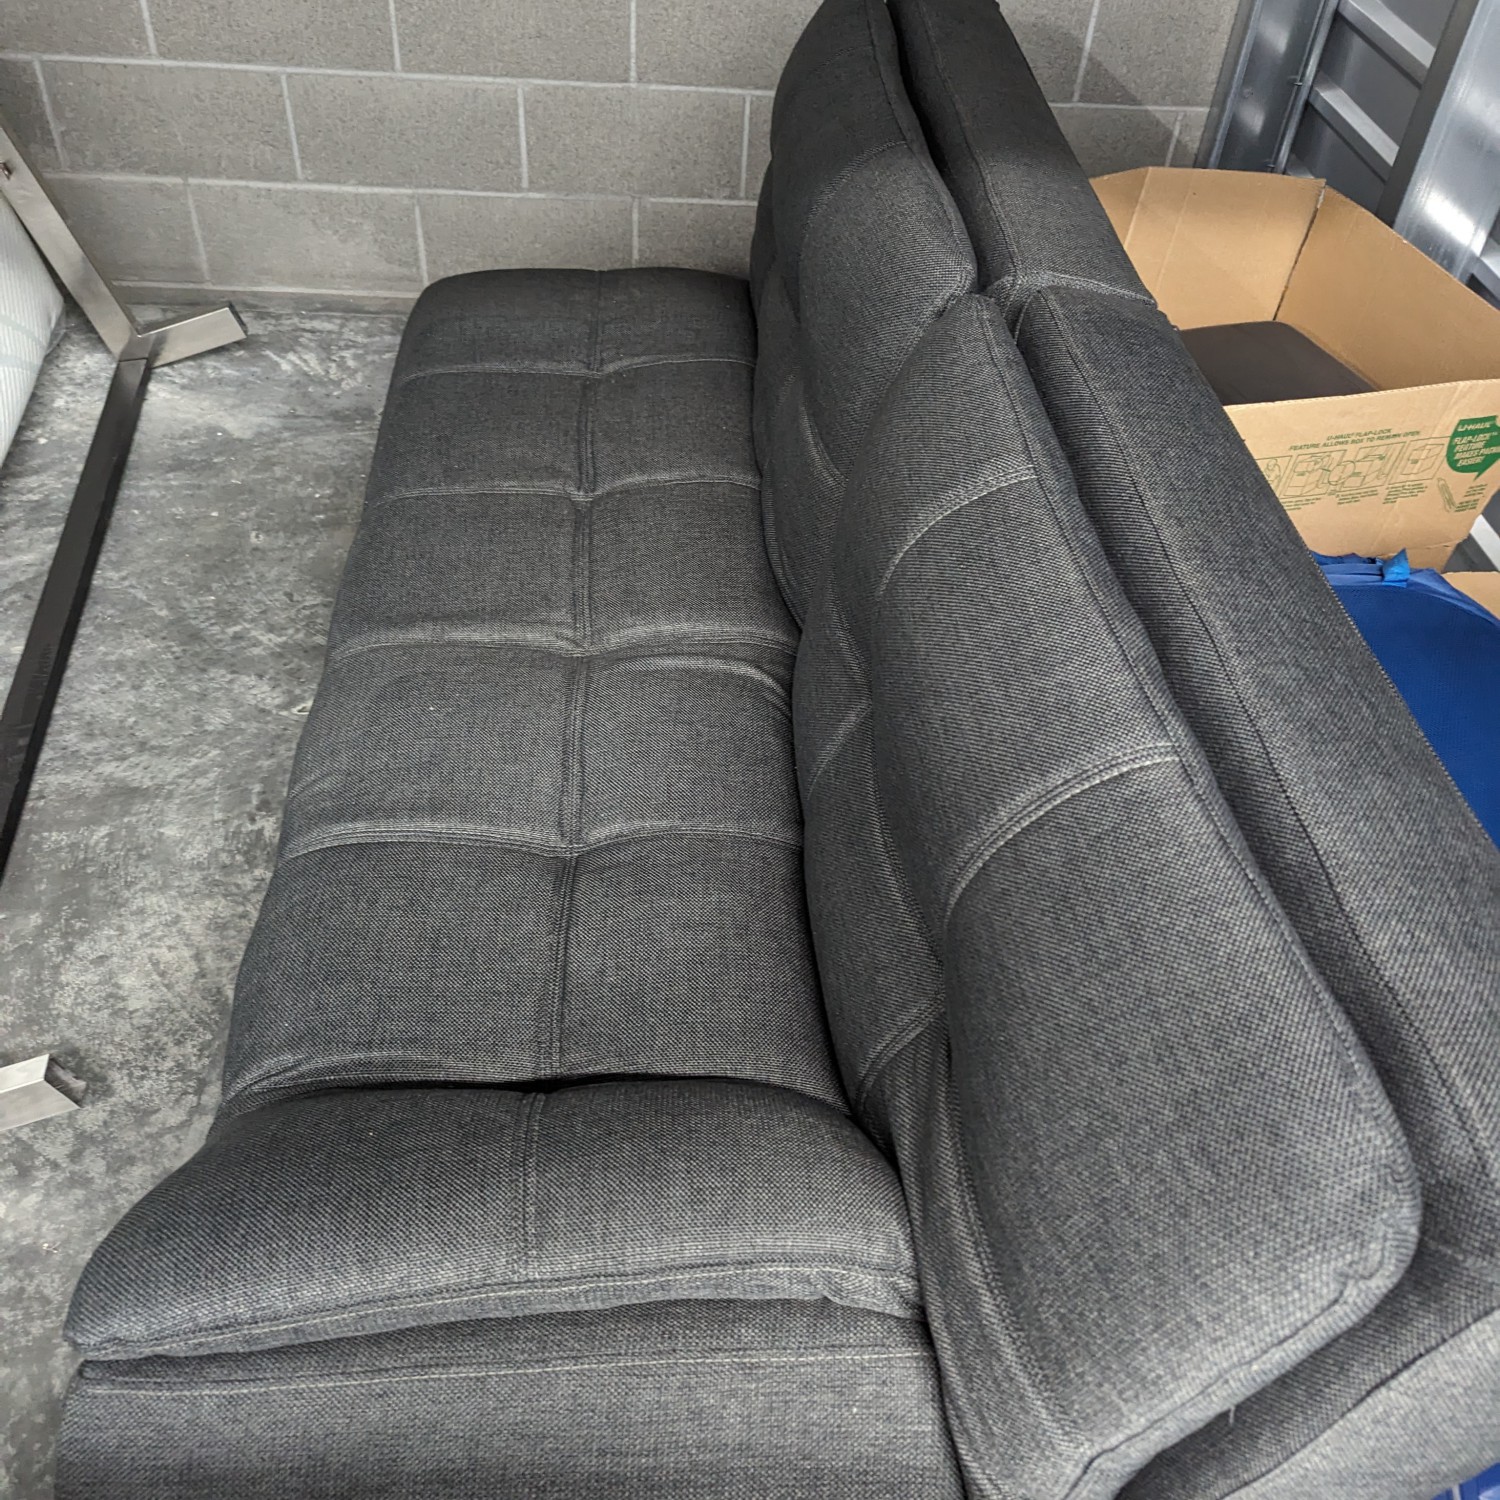 Loveseat, futon with foldable arm rests